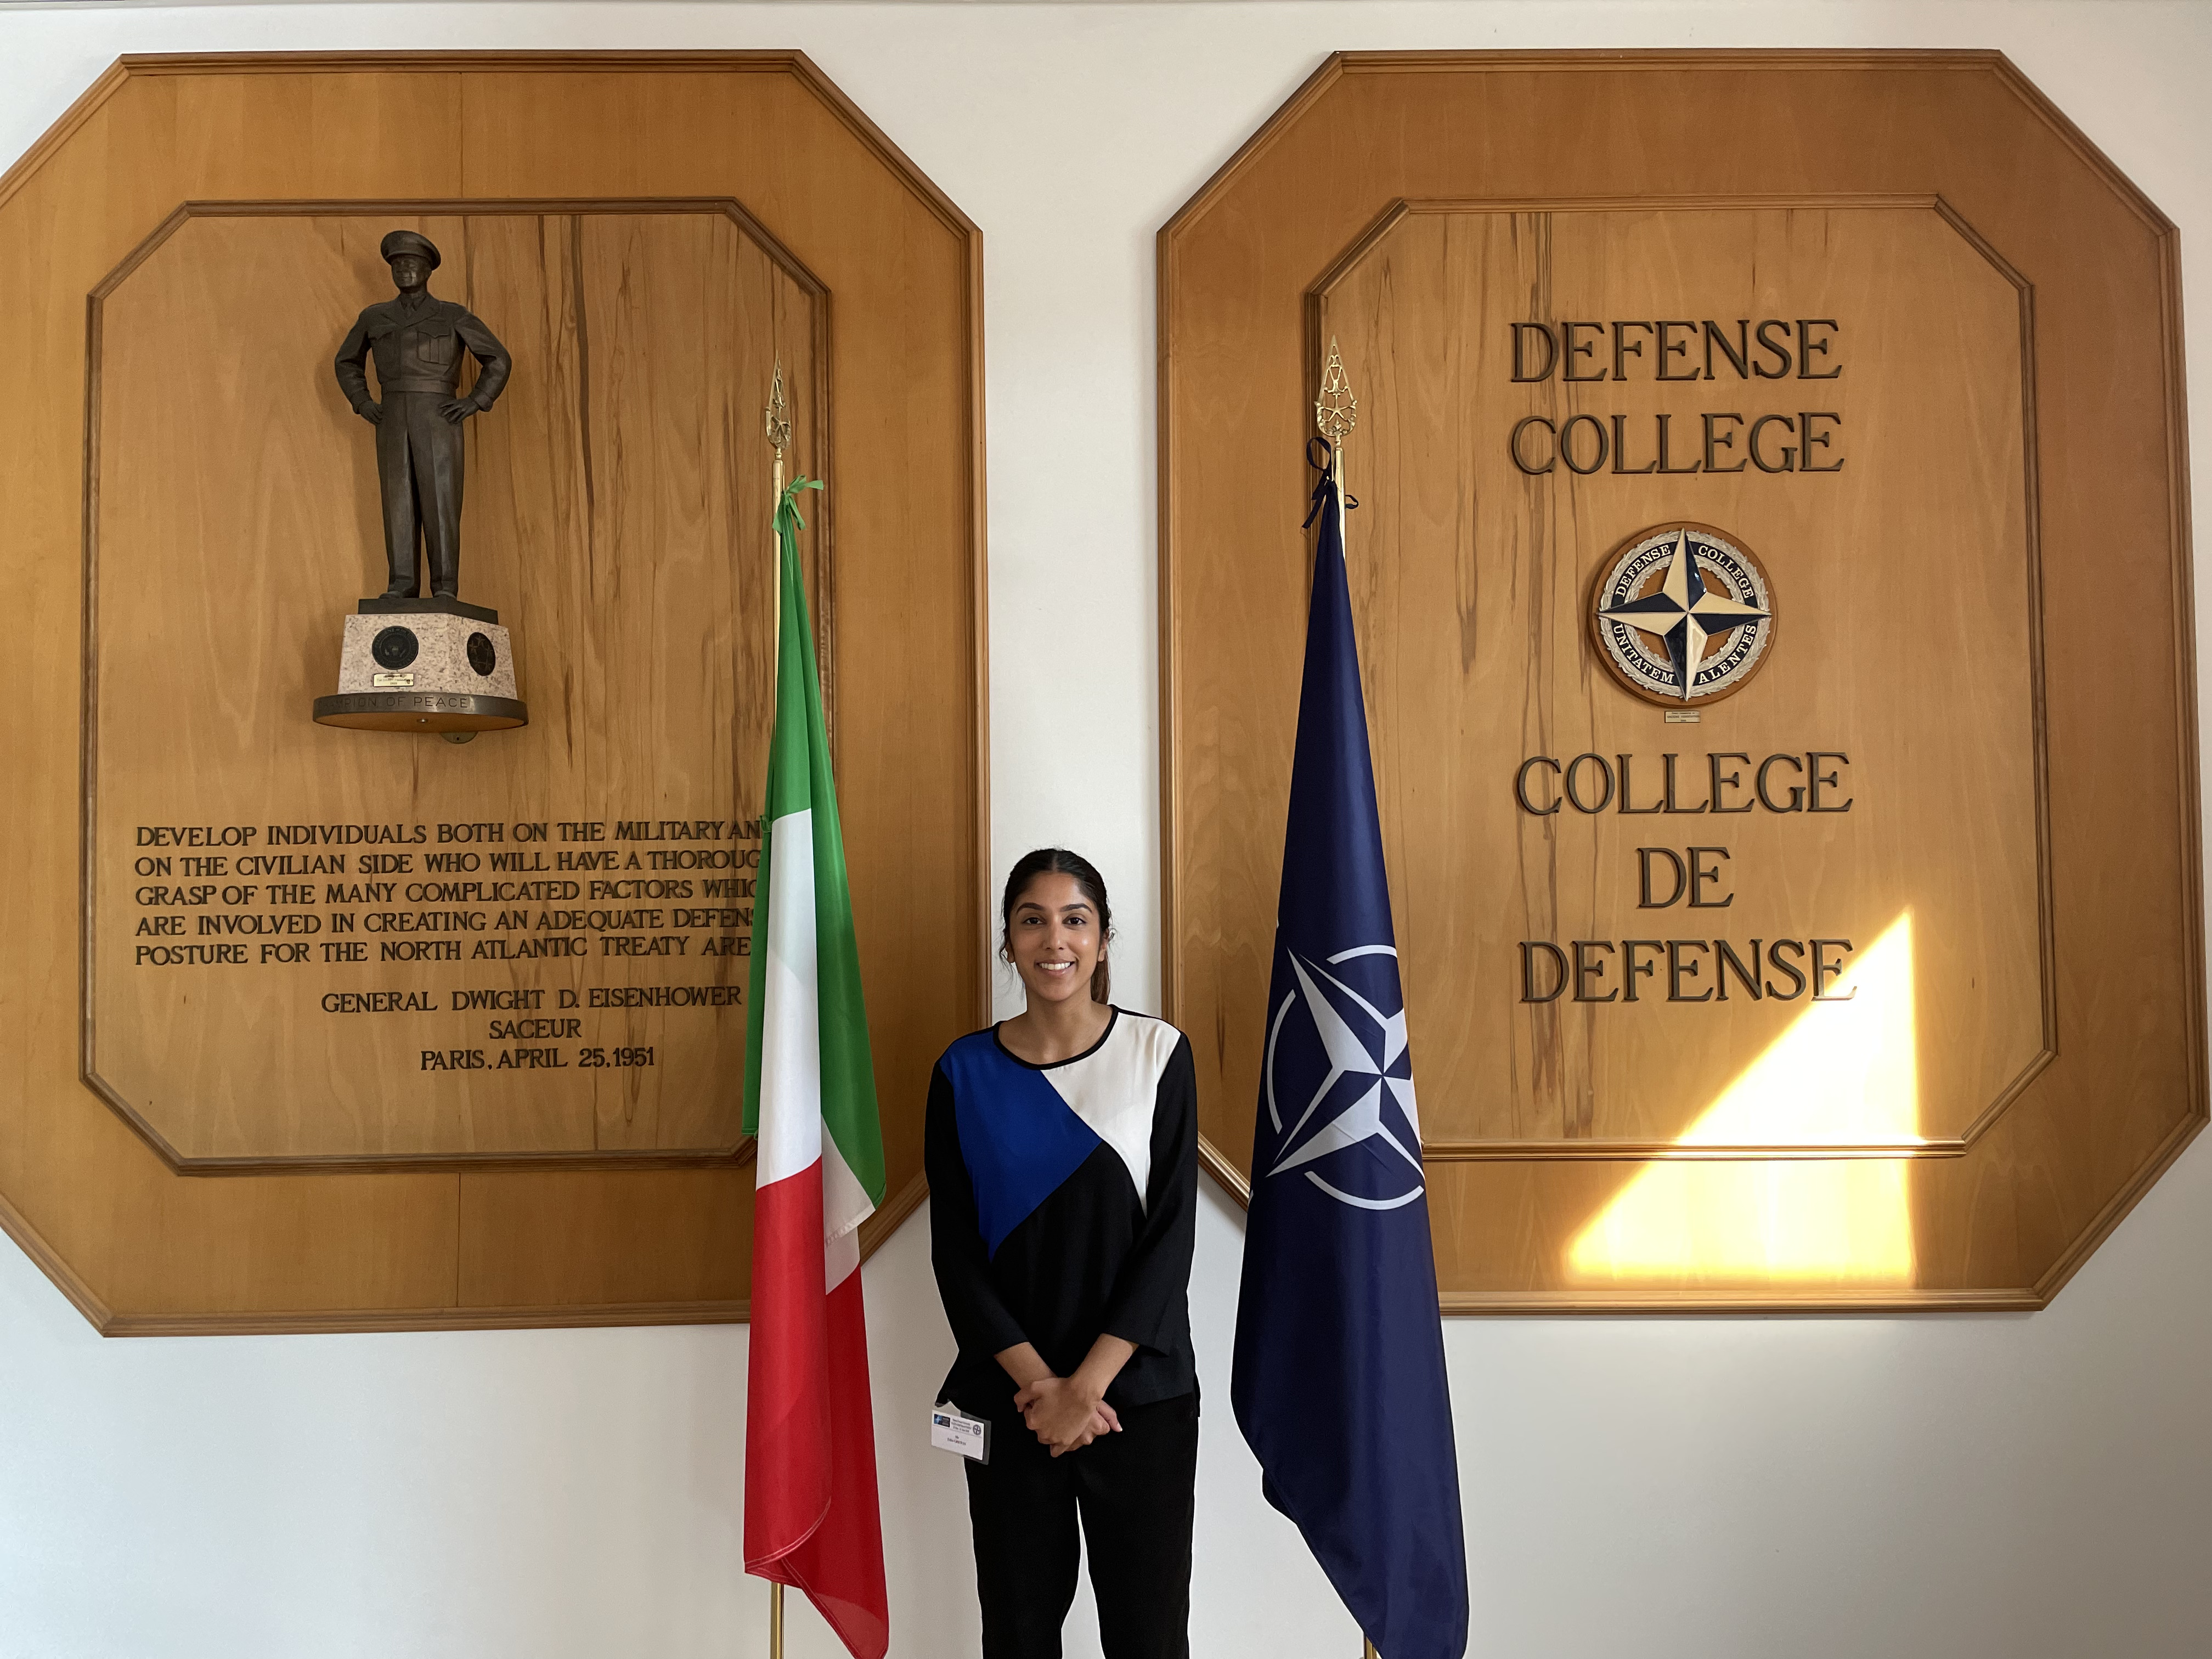 The Entrance of the NATO Defense College in Rome, Italy